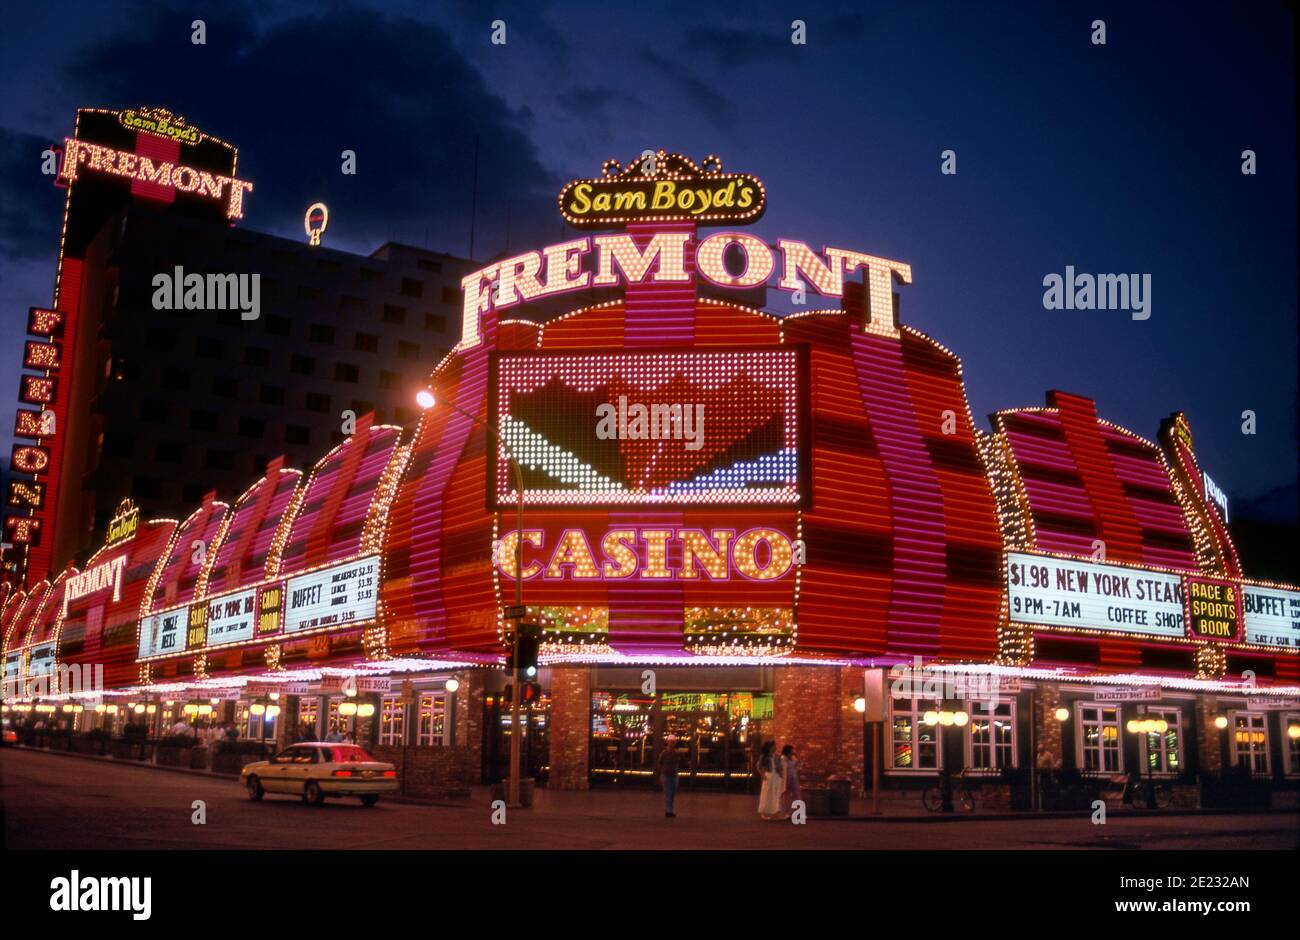 SAm Boyd's Fremont Casino and Hotel on Fremont Street in Downtown Las Vegas, Nevada Stock Photo